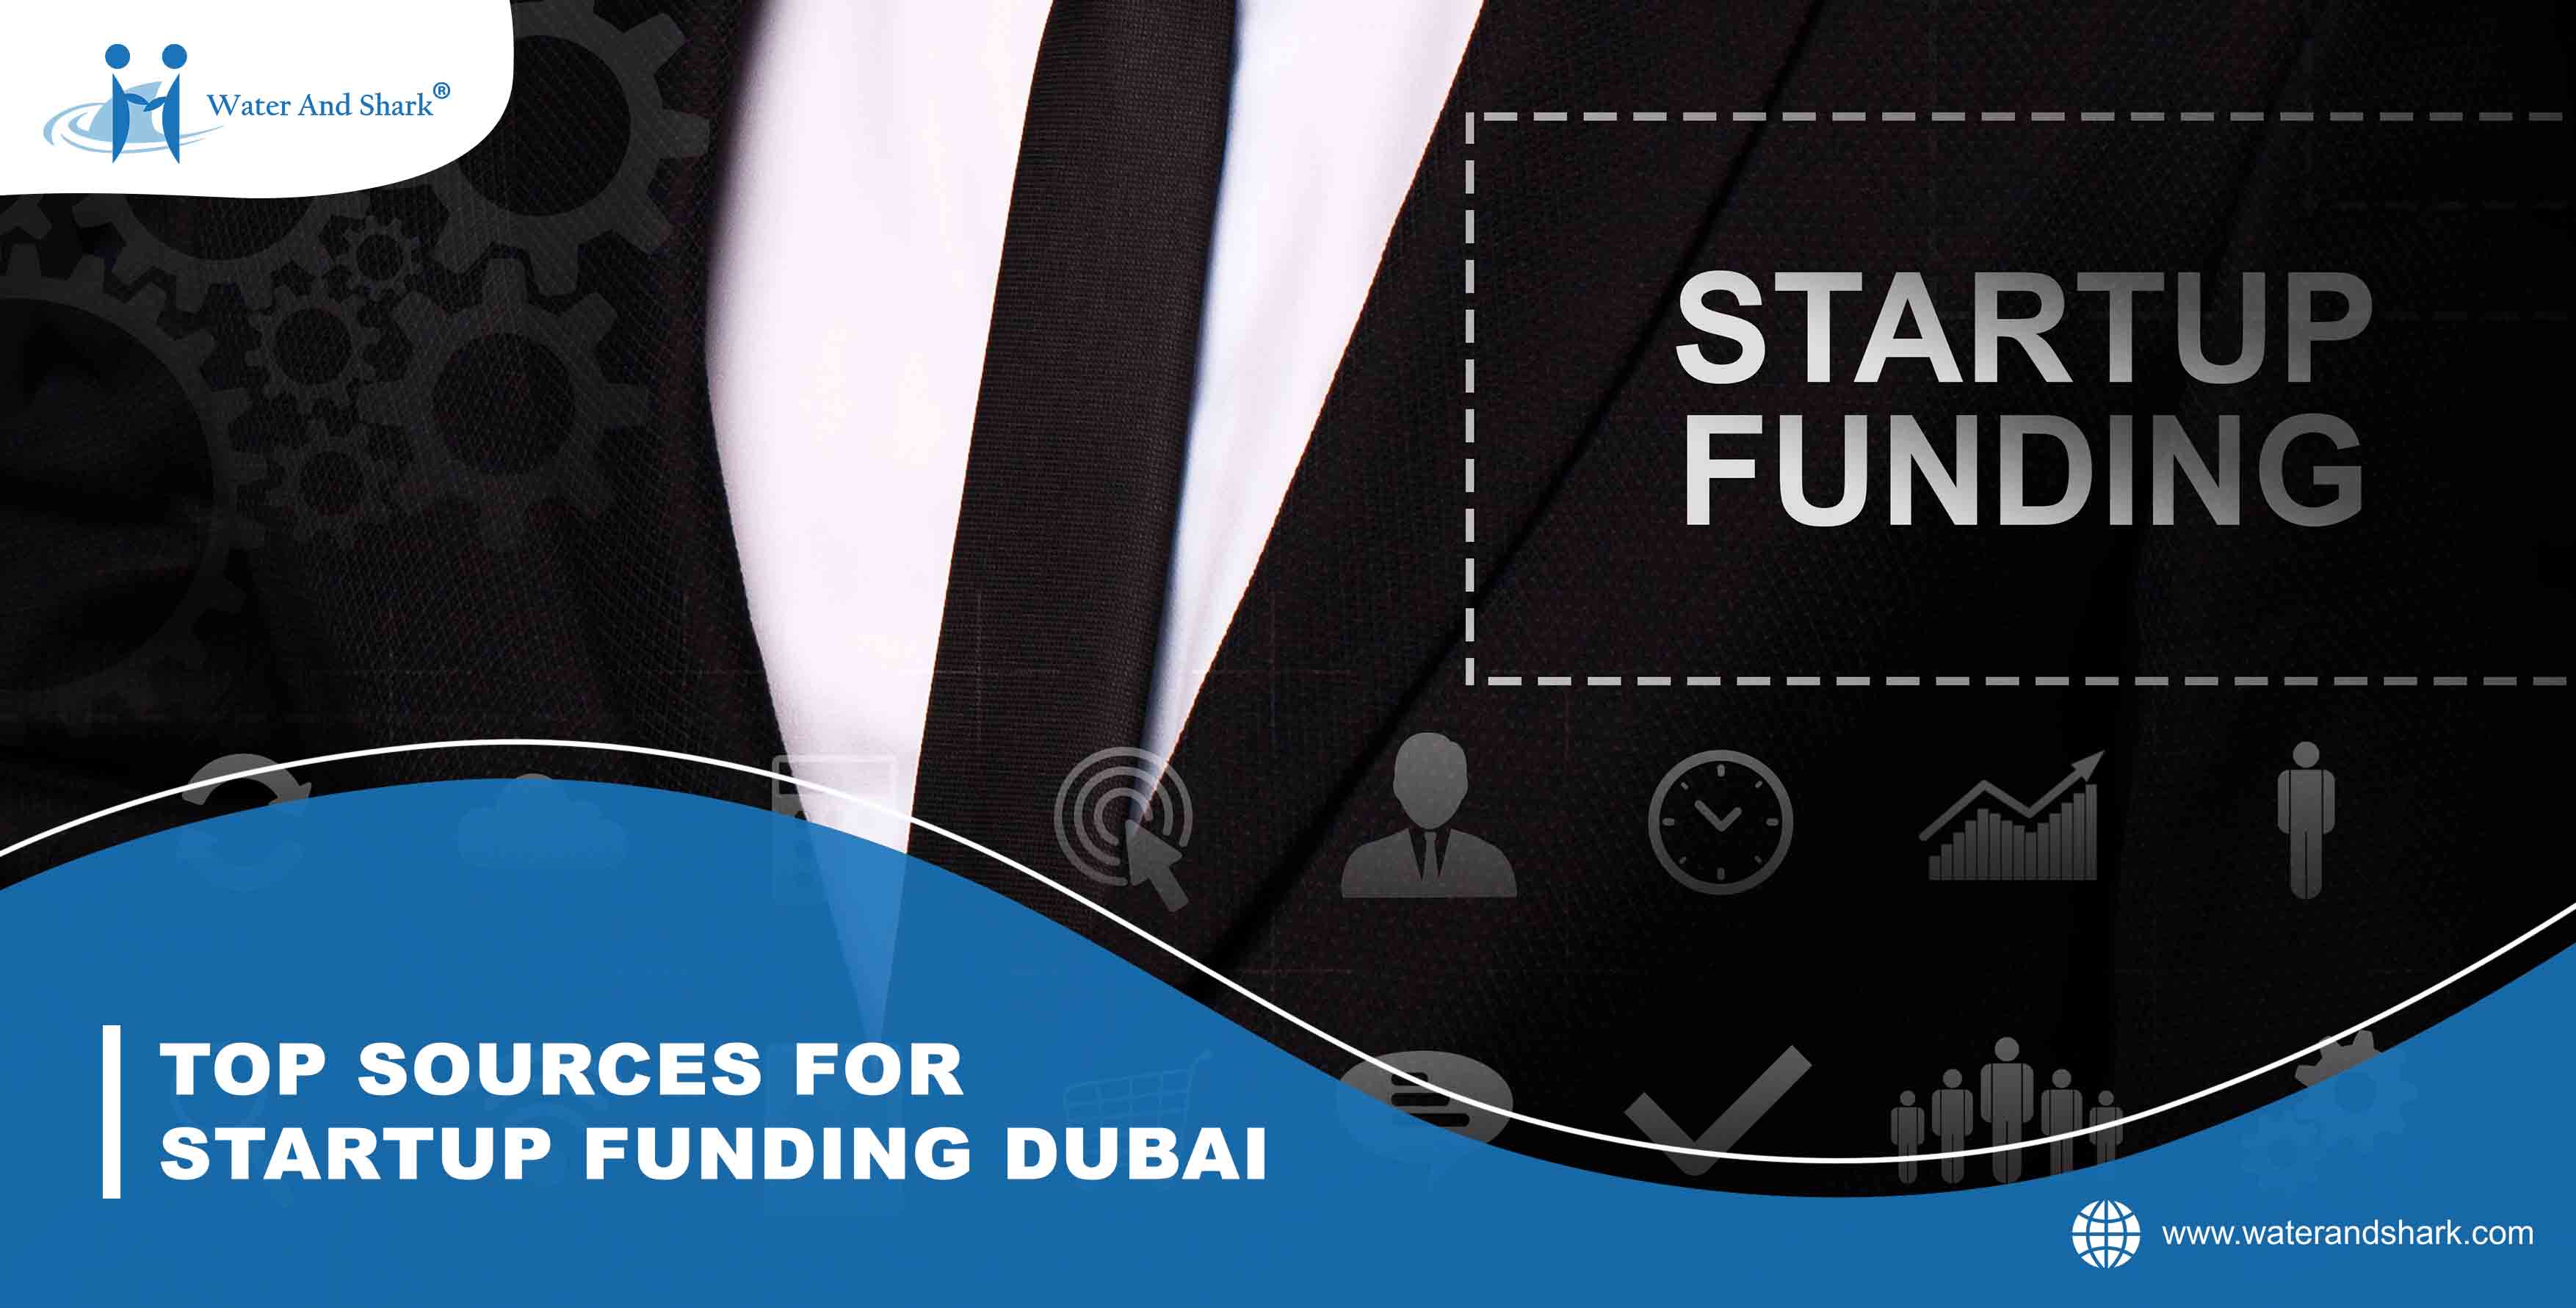 650x1280_TOP_SOURCES_FOR_STARTUP_FUNDING_DUBAI_low_size.jpg